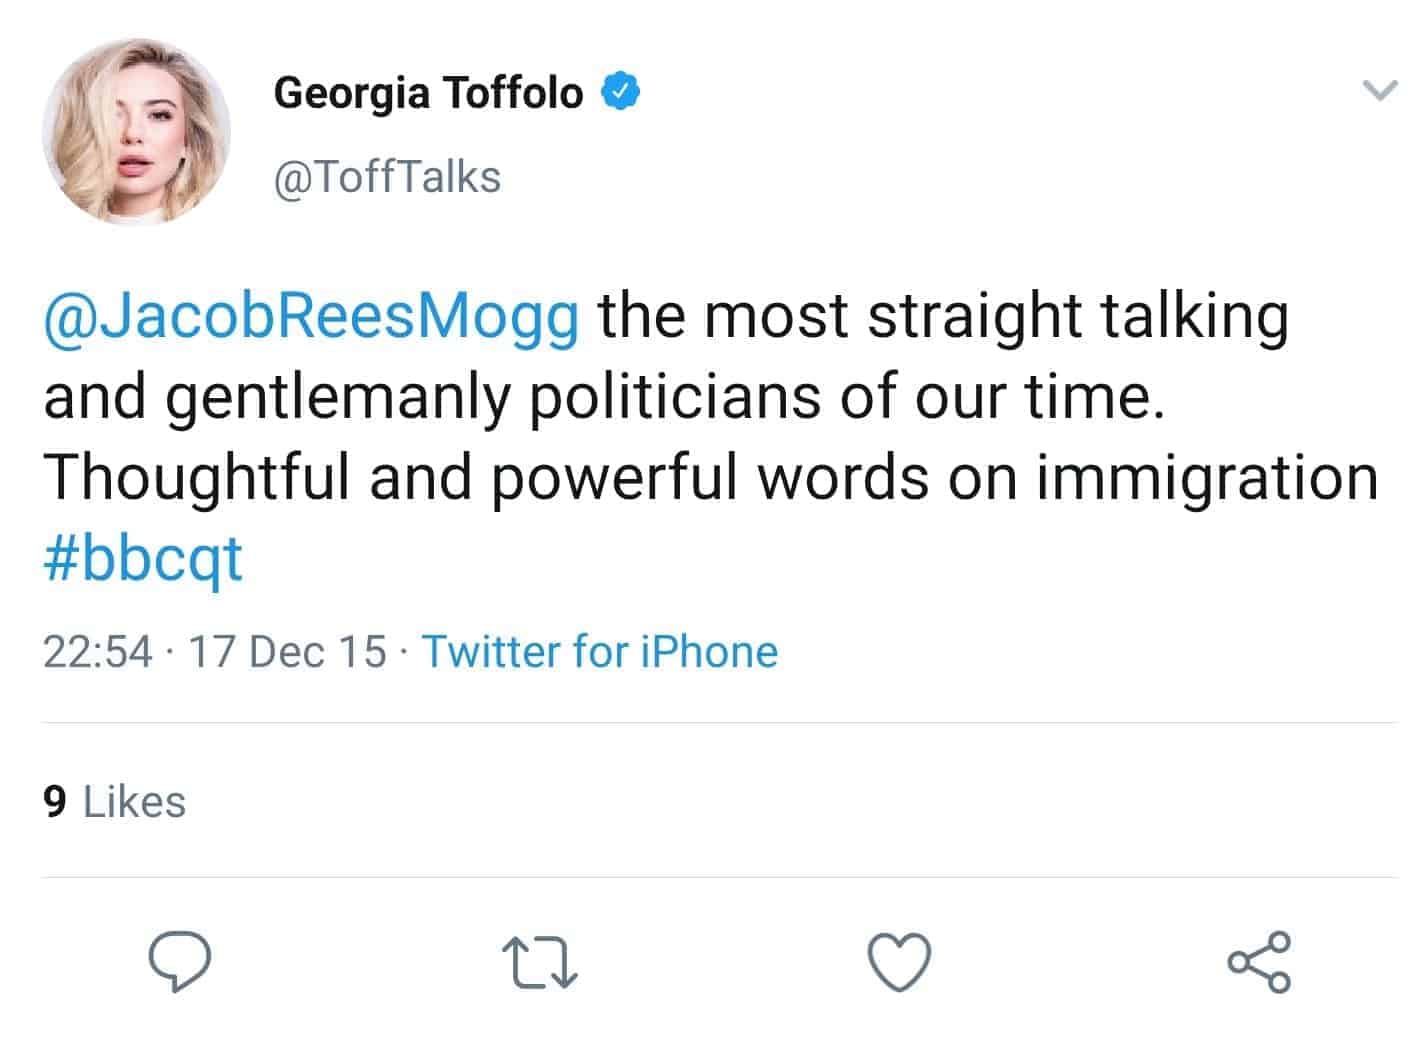 Toff gets stung by her own strong beliefs on immigration controls